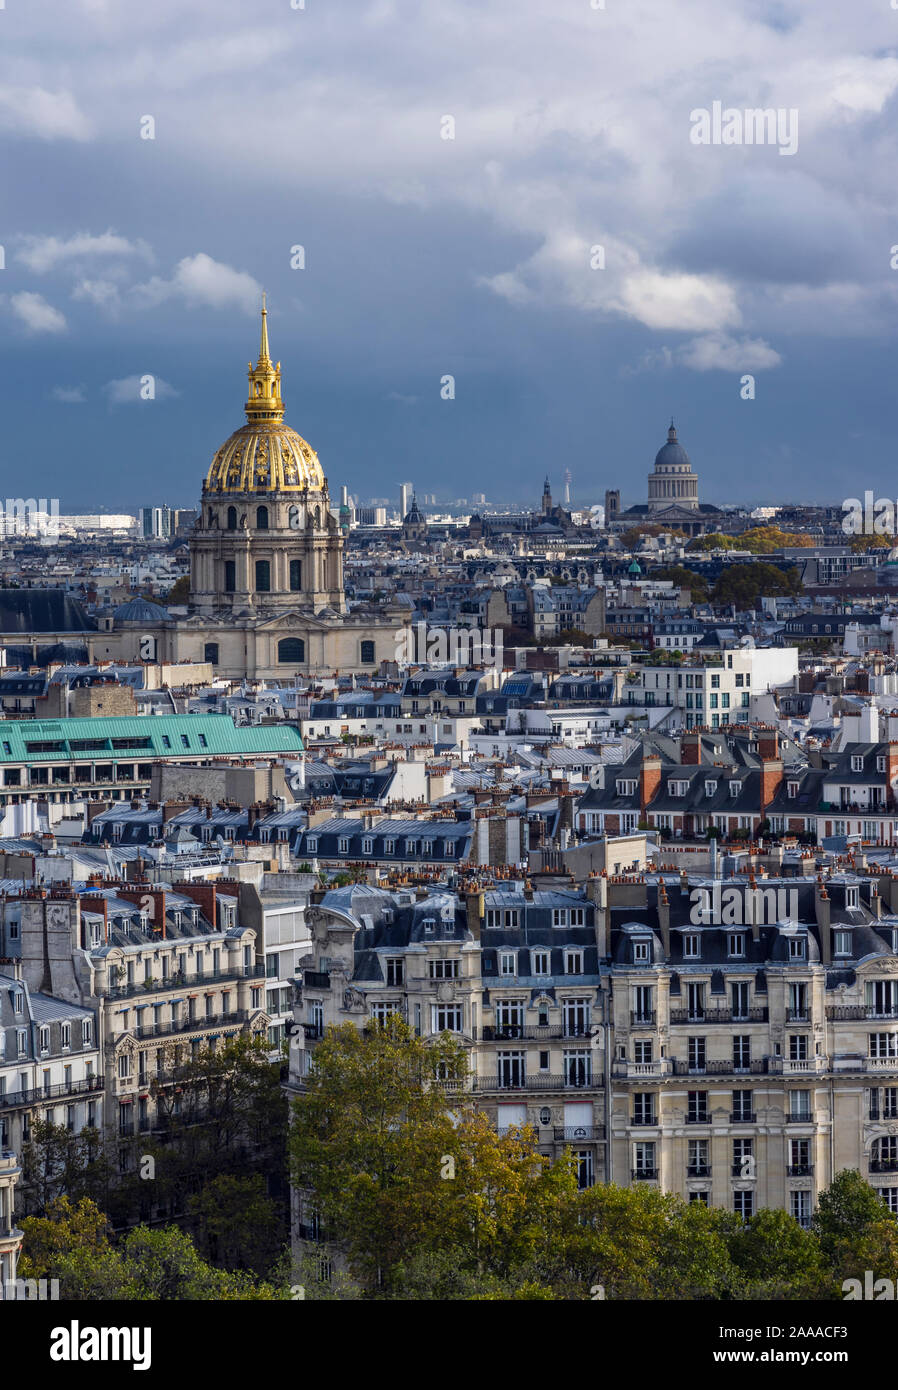 Two domes in Paris. Covered in gold belongs to Army Museum. In distance is Pantheon Stock Photo